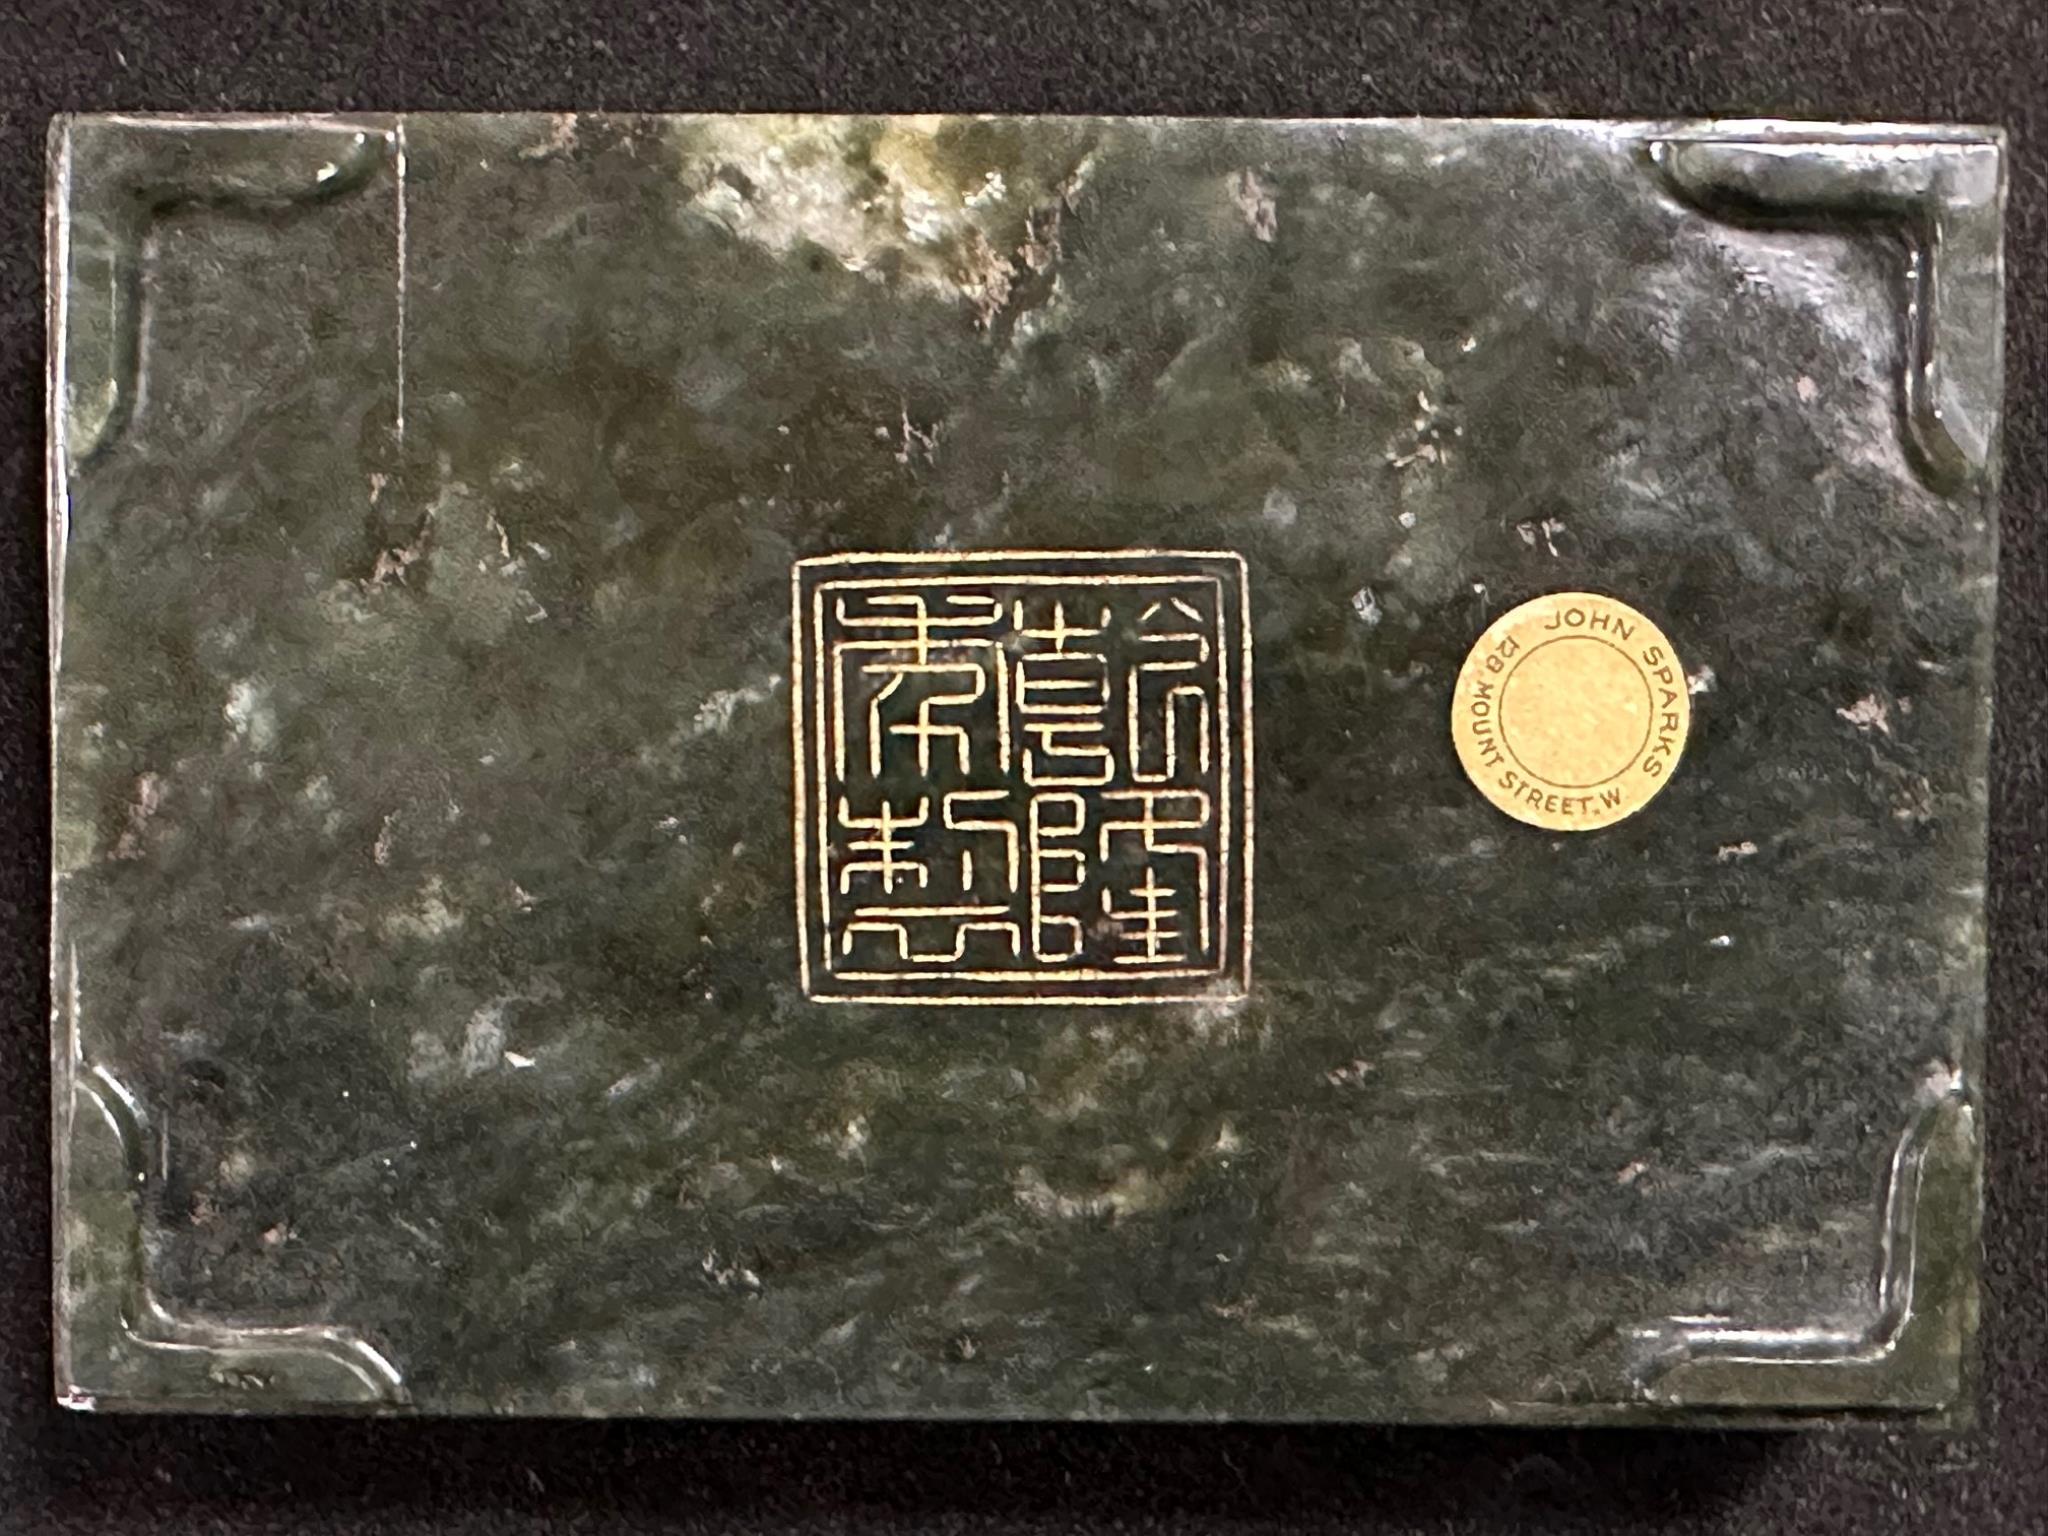 Chinese Box Valued at £40,000-60,000 Hidden in Plain Sight